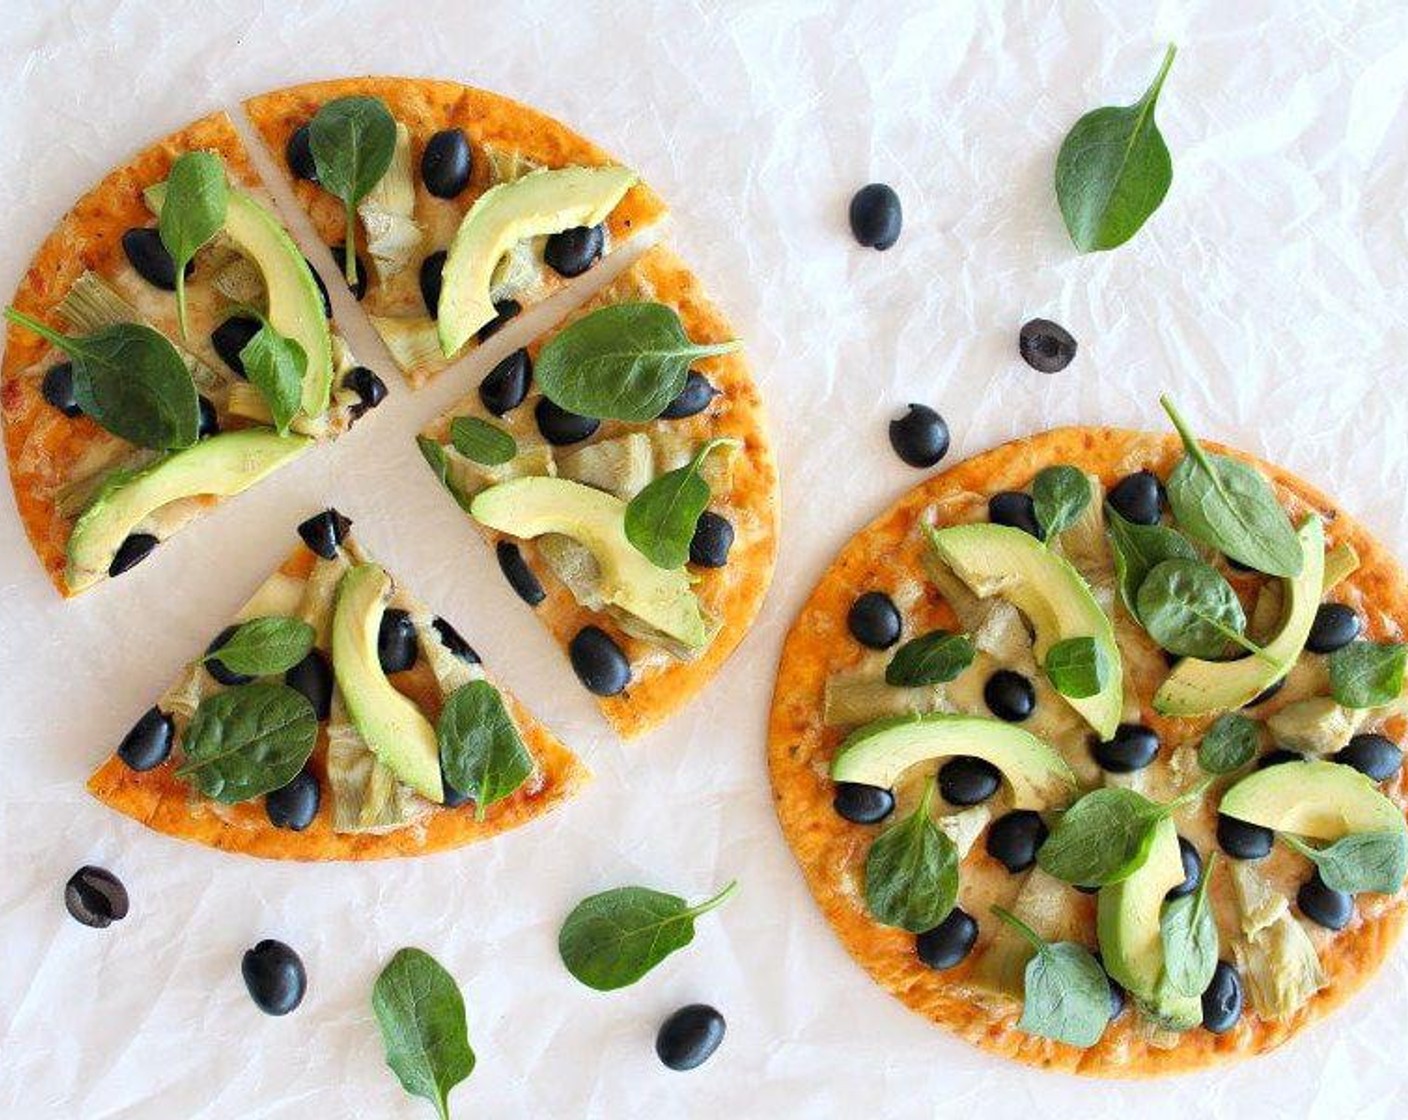 step 4 Place the Avocado (1) on the pizzas and scatter with the Fresh Baby Spinach (1/2 cup). Slice and serve. Enjoy!